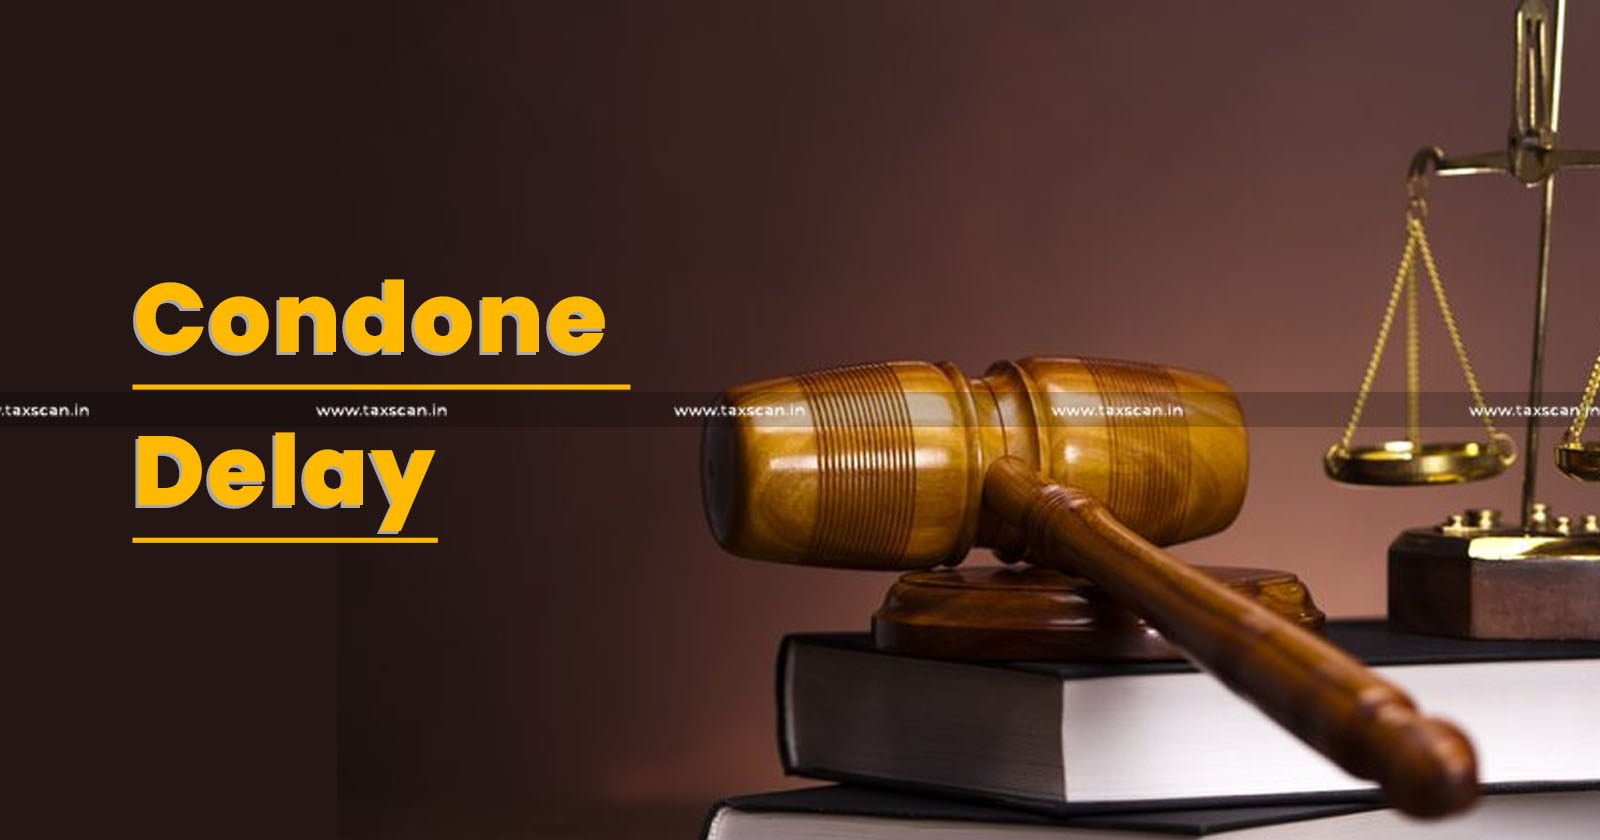 ITAT Refuses to Condone a Delay - ITAT - Condone a Delay - Filing Income Tax Appeal - Income Tax Appeal - Appeal - Income Tax - Filing Income Tax Appeal without Reasonable Cause - Taxscan